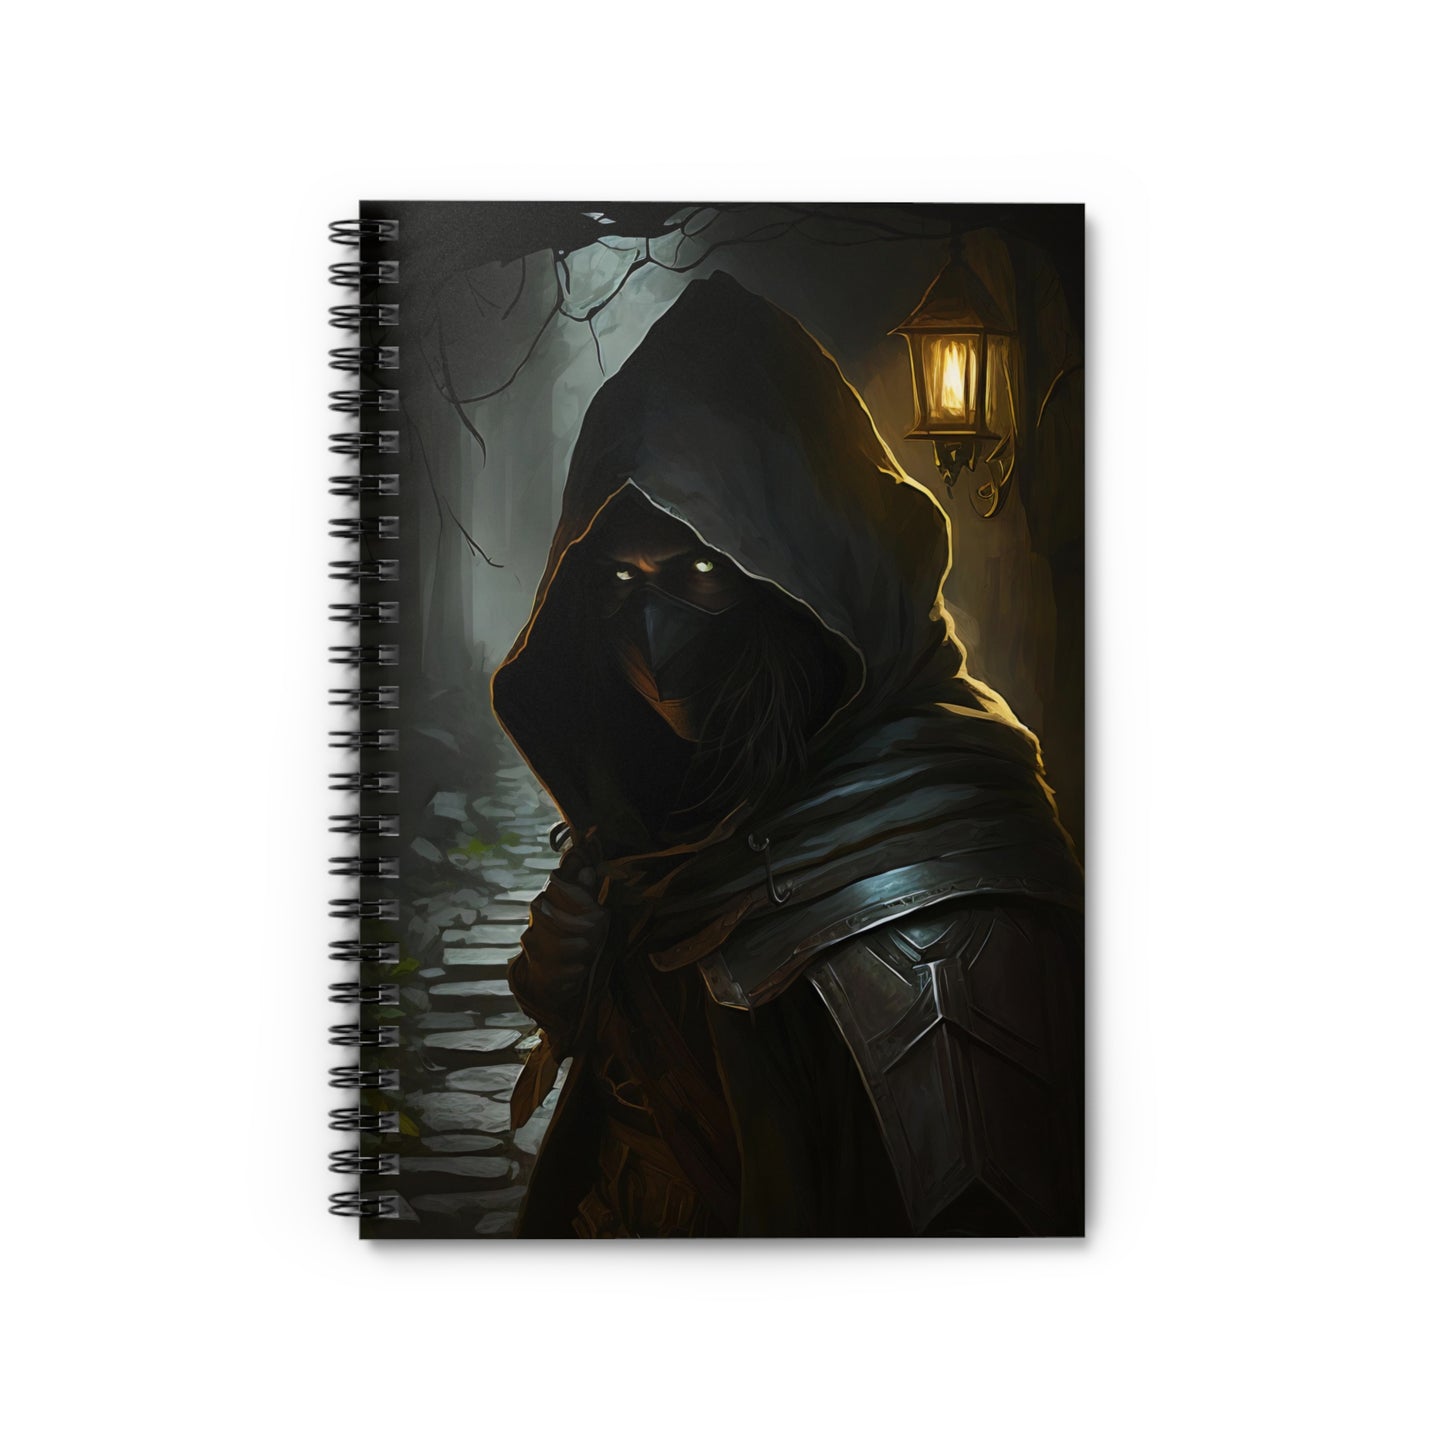 DnD Campaign Journal, Male Rogue Spiral Notebook, Ruled Line, Tabletop Gaming D&D Character Notepad, Pathfinder Journal, Shadow's Veil